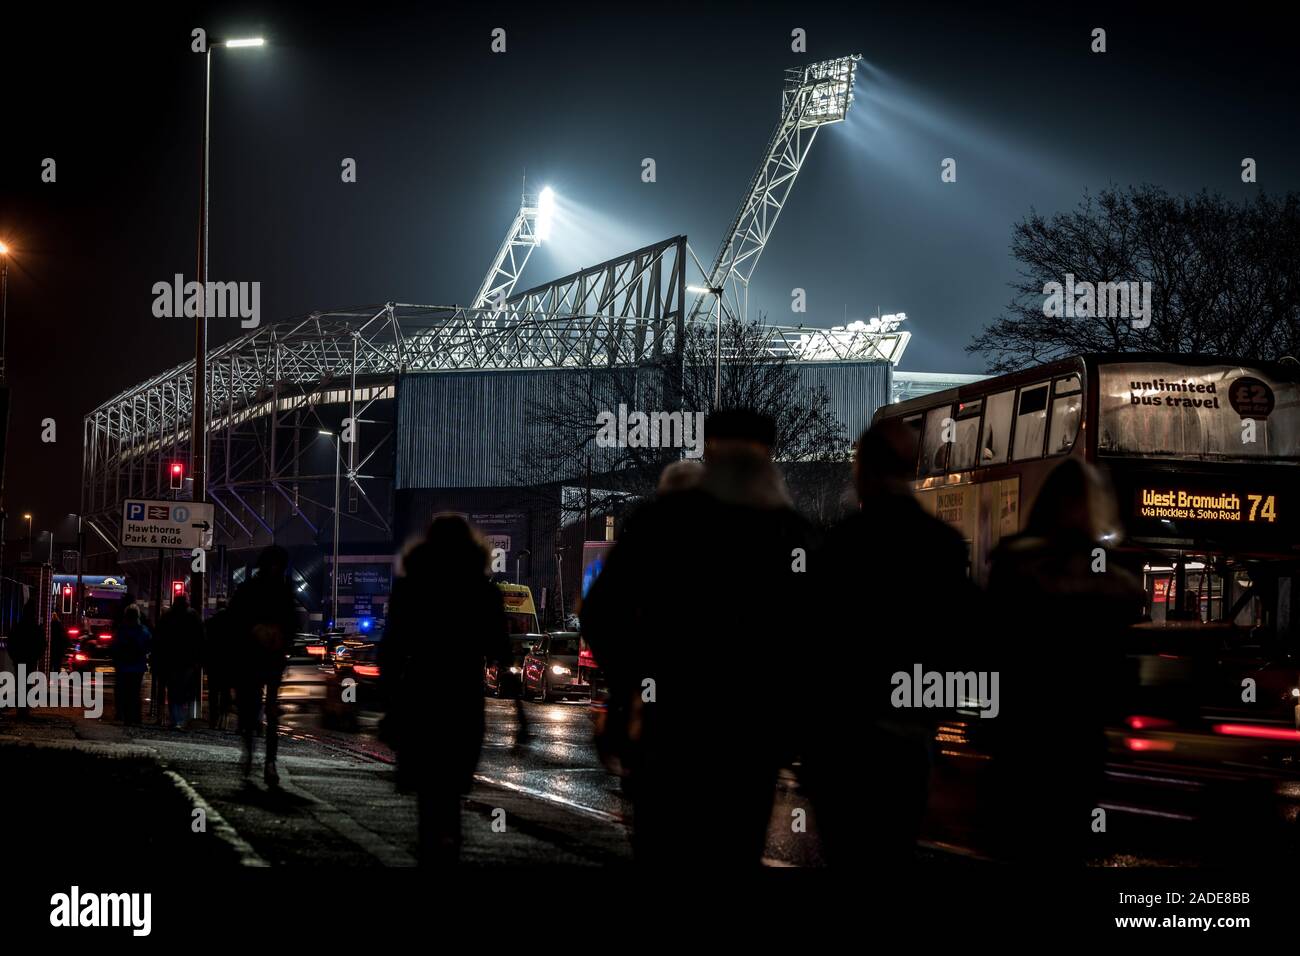 27/11/2019 The Hawthorns football stadium home to West Bromwich Albion ahead of the game against Bristol City watched by 22,197 supporters. Stock Photo